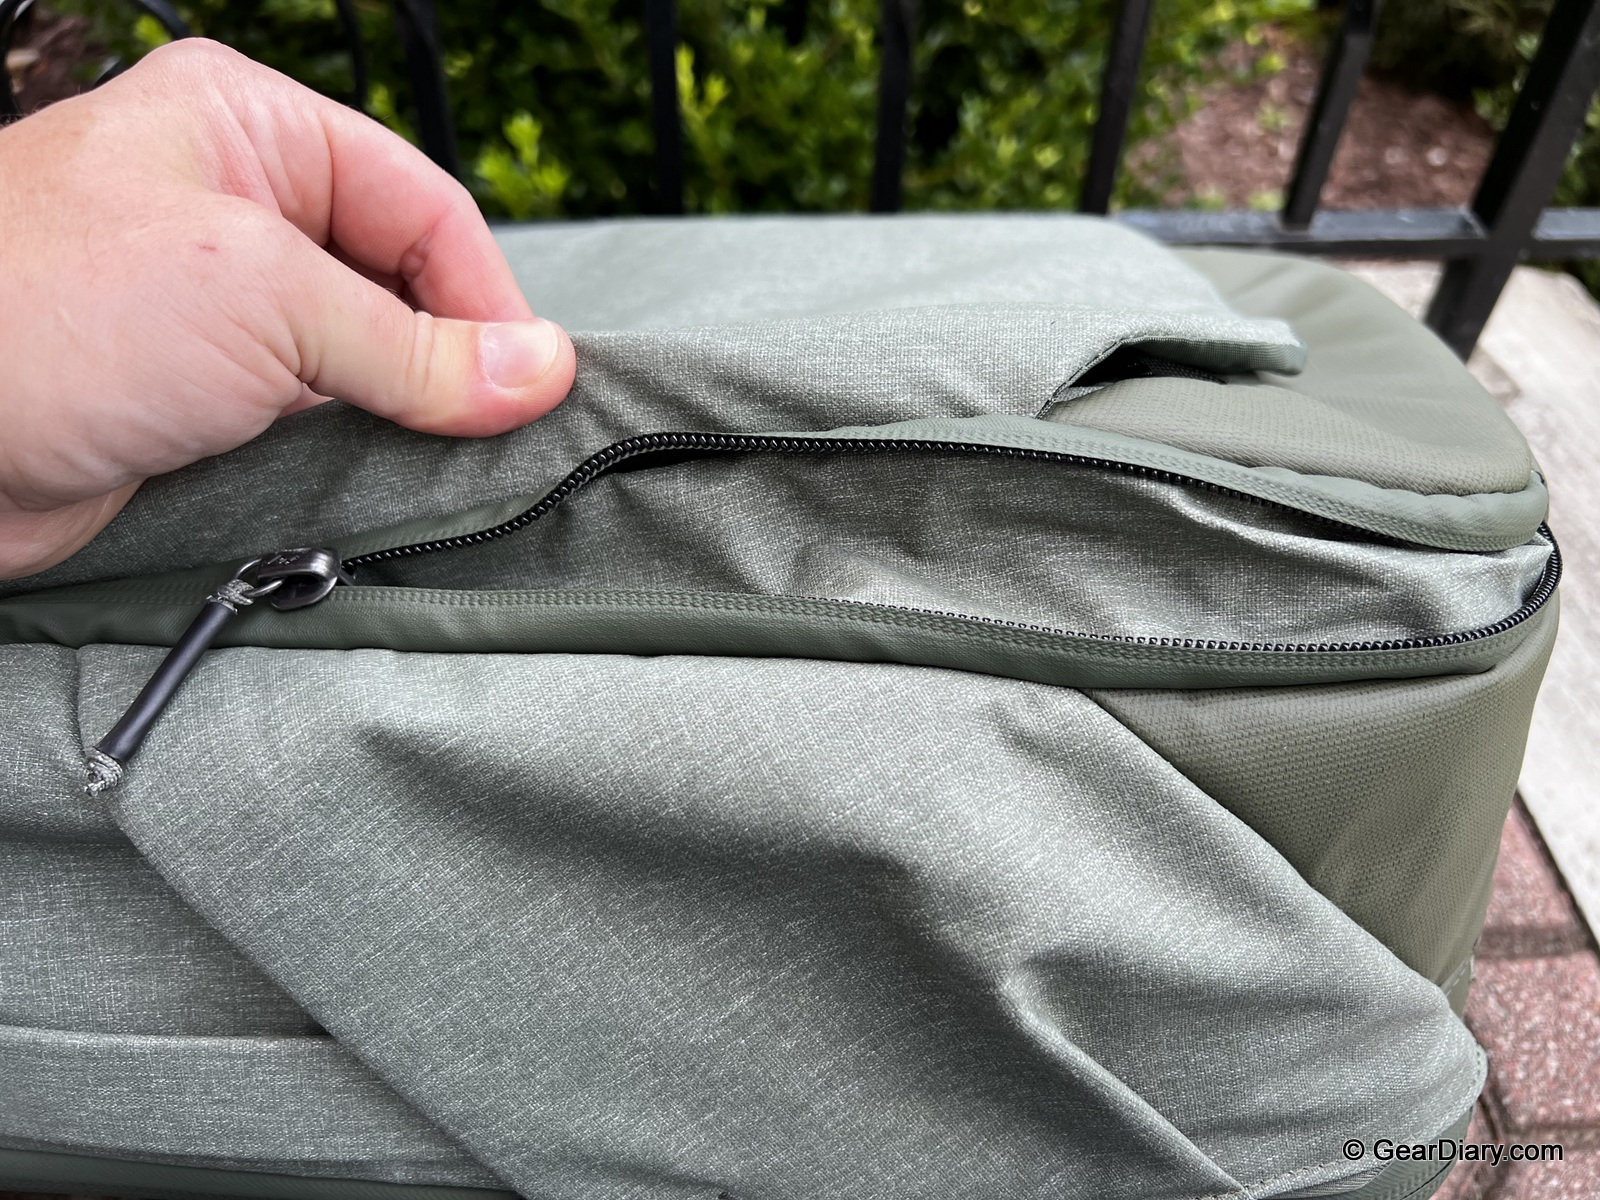 Peak Design Travel Backpack 30L Review: This Bag Is the Peak of Minimalistic Travel Excellence